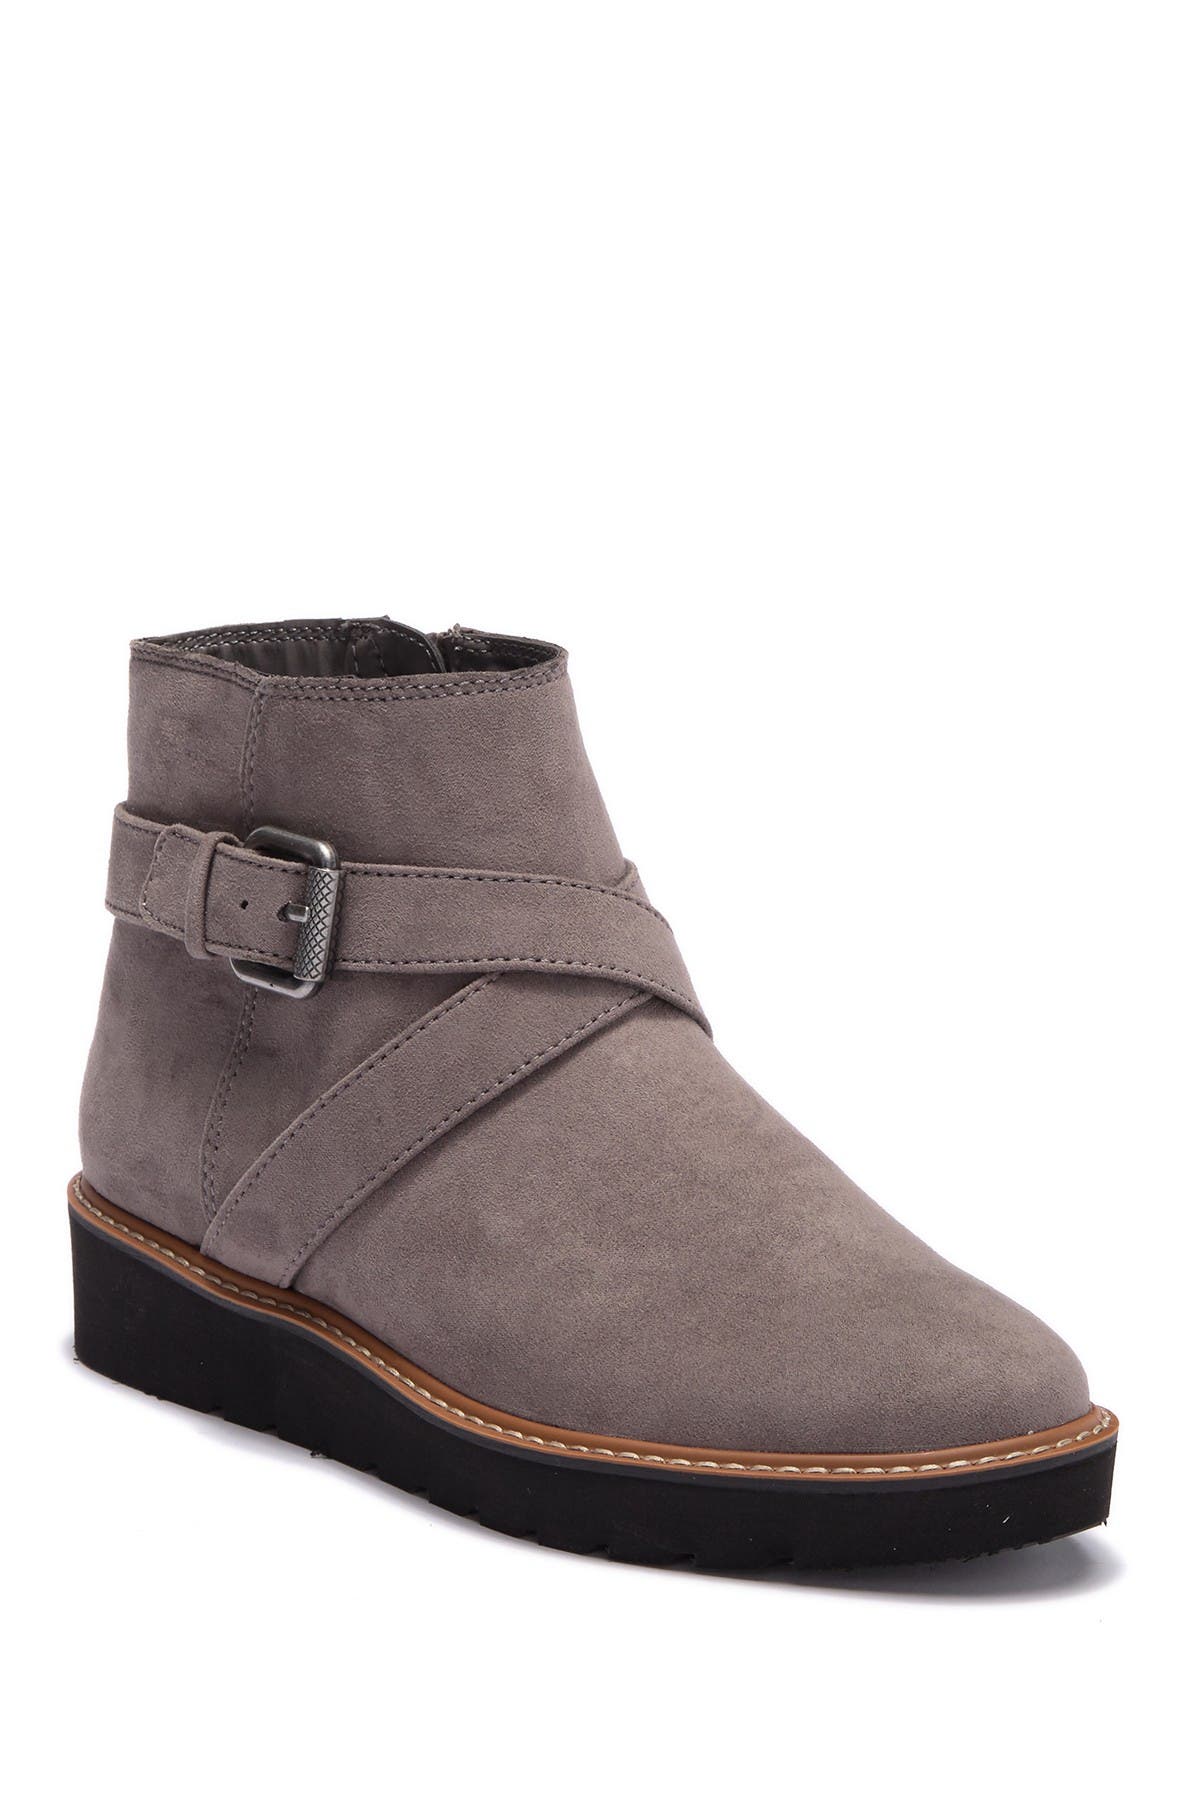 Naturalizer | Element Ankle Boot 